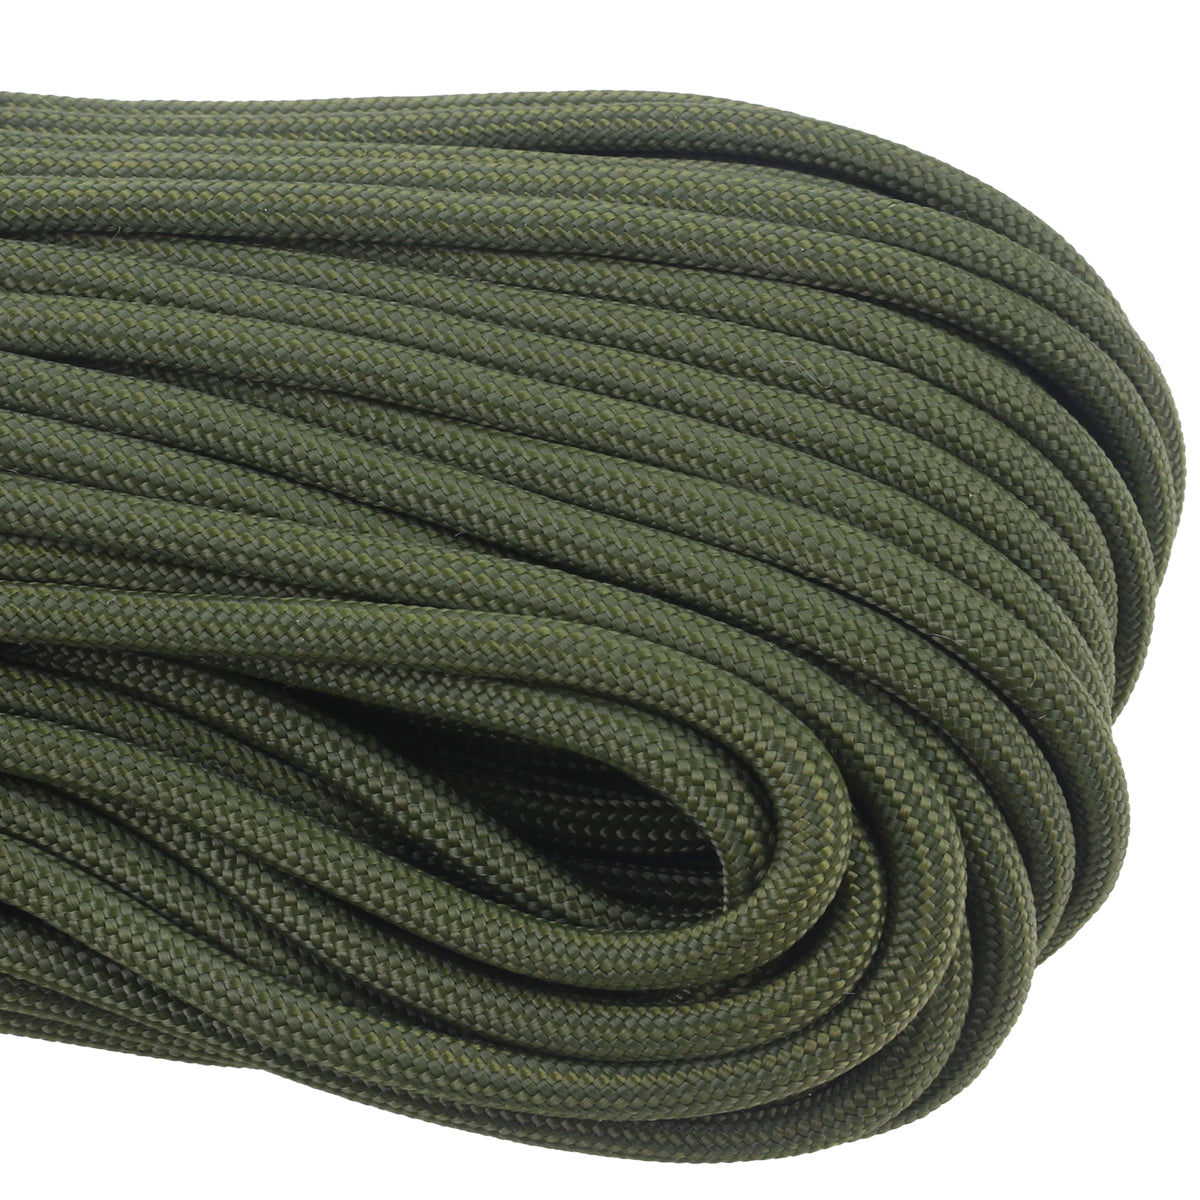 550 Paracord - Olive Drab – Atwood Rope MFG